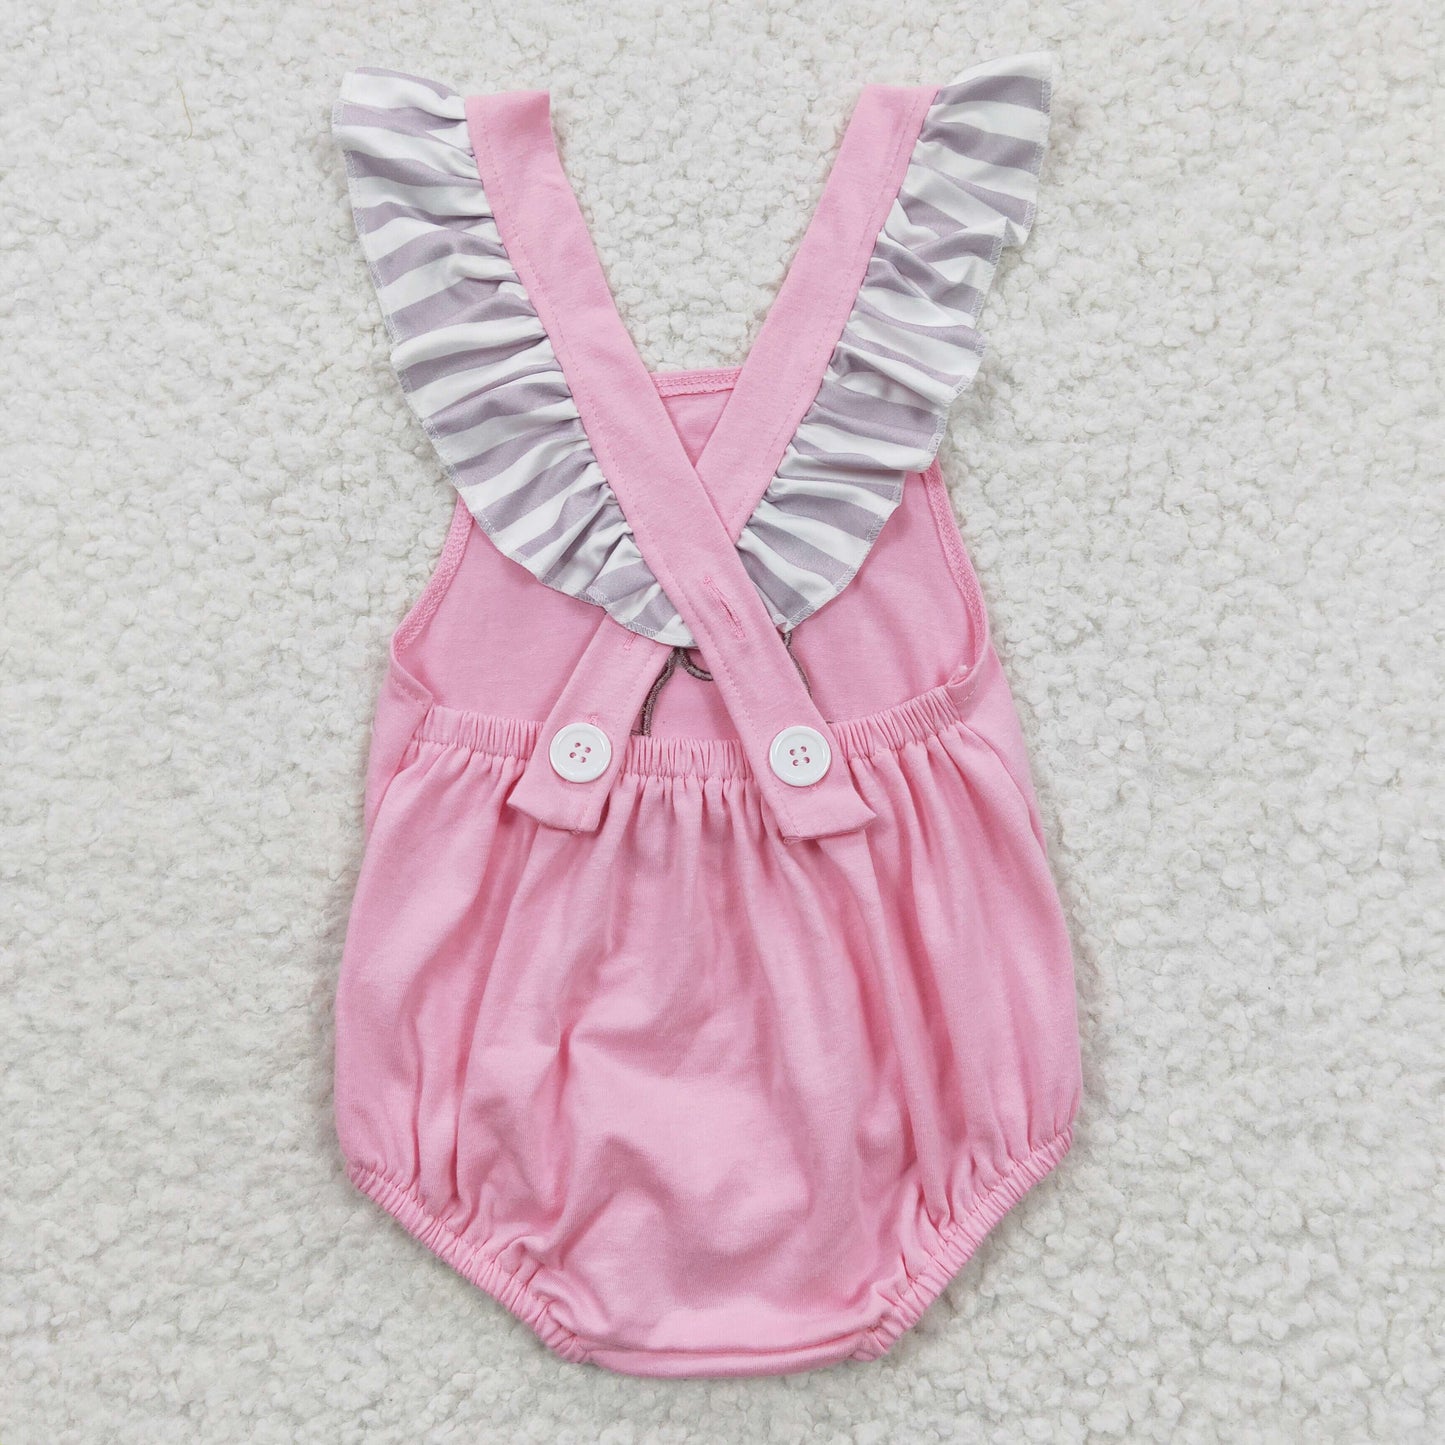 pink cotton dog embroidery cross romper for little girl